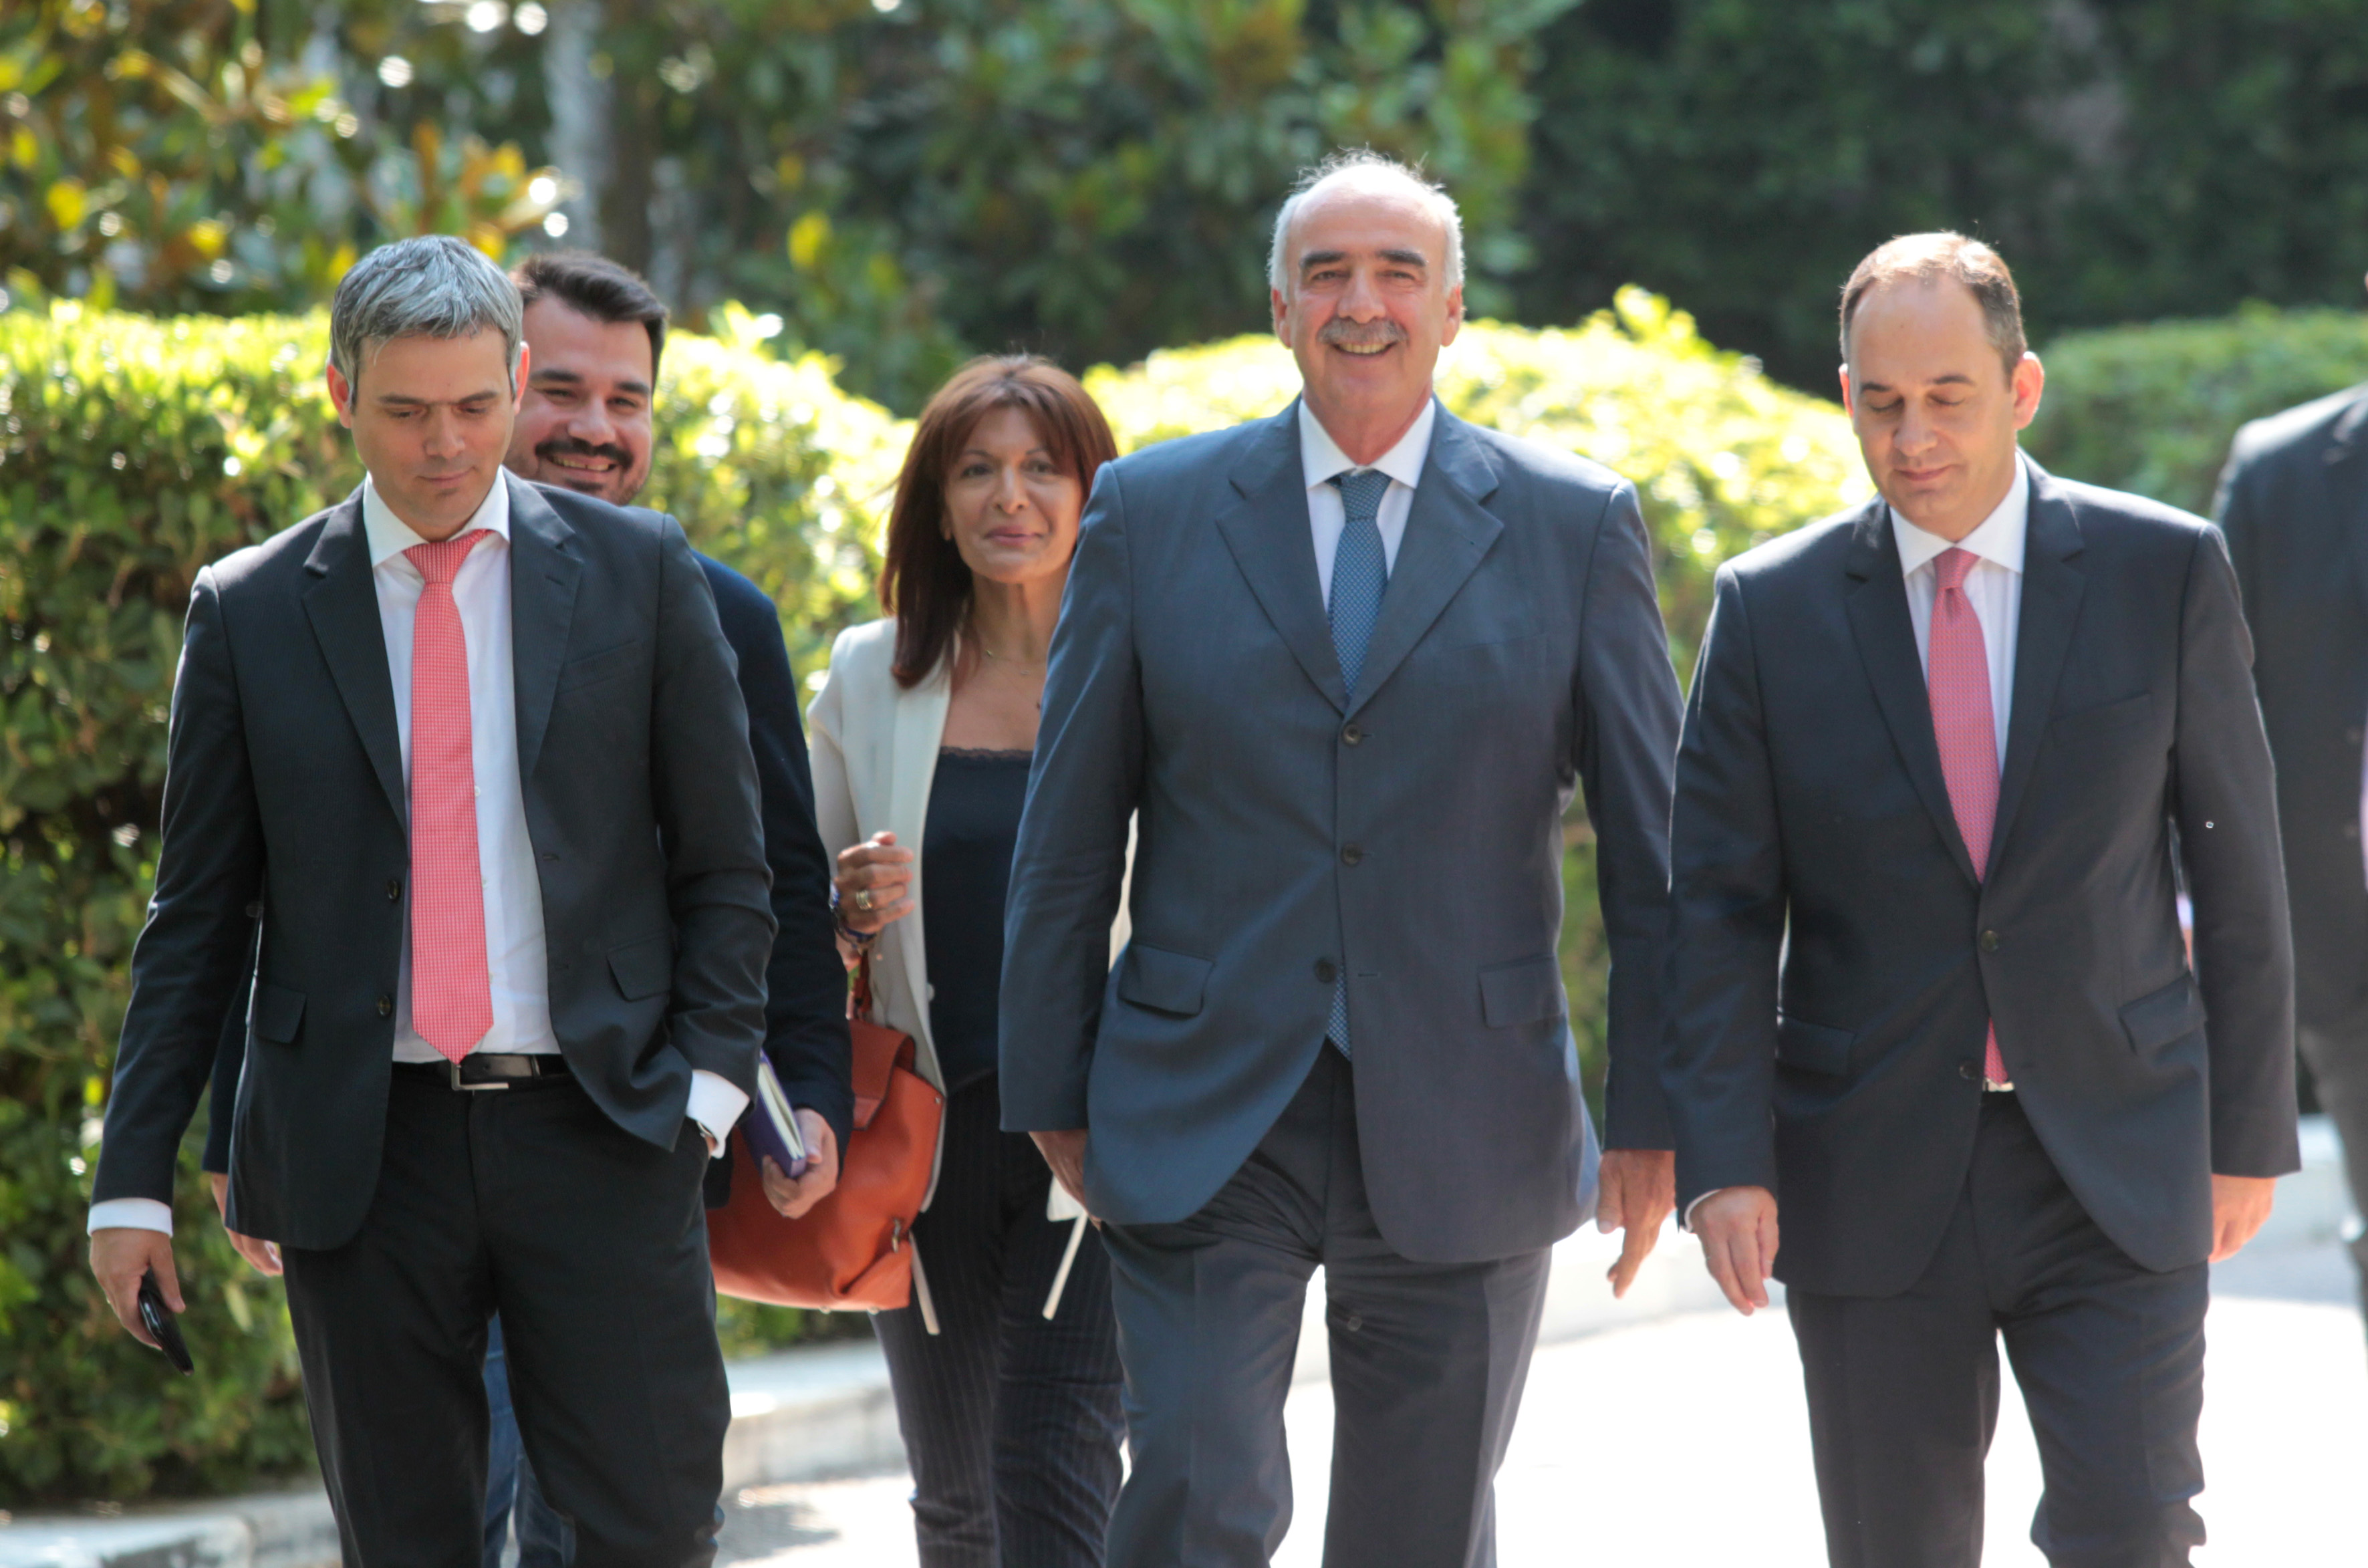 Meimarakis: “There is still room for a national consensus”